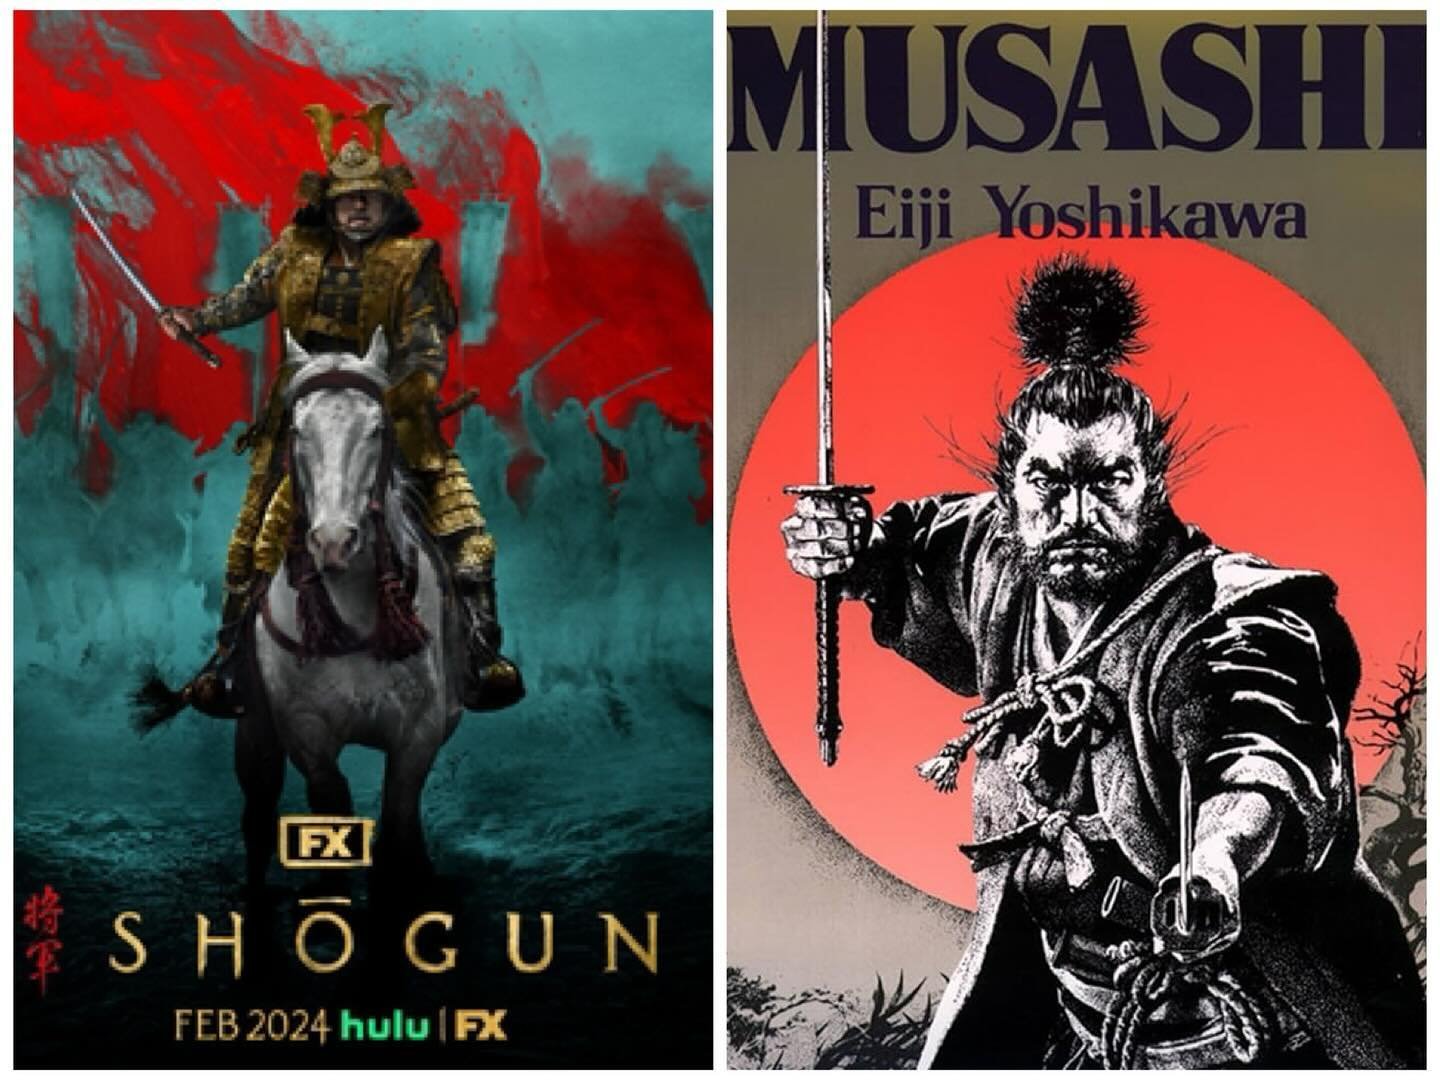 FYI: If you just finished watching the incredible SHOGUN and wanted more, go get your hands on MUSHASHI by Eiji Yoshikawa. It&rsquo;s an amazing book set in the same time period&mdash;the first chapter actually picks up almost EXACTLY where Shogun en